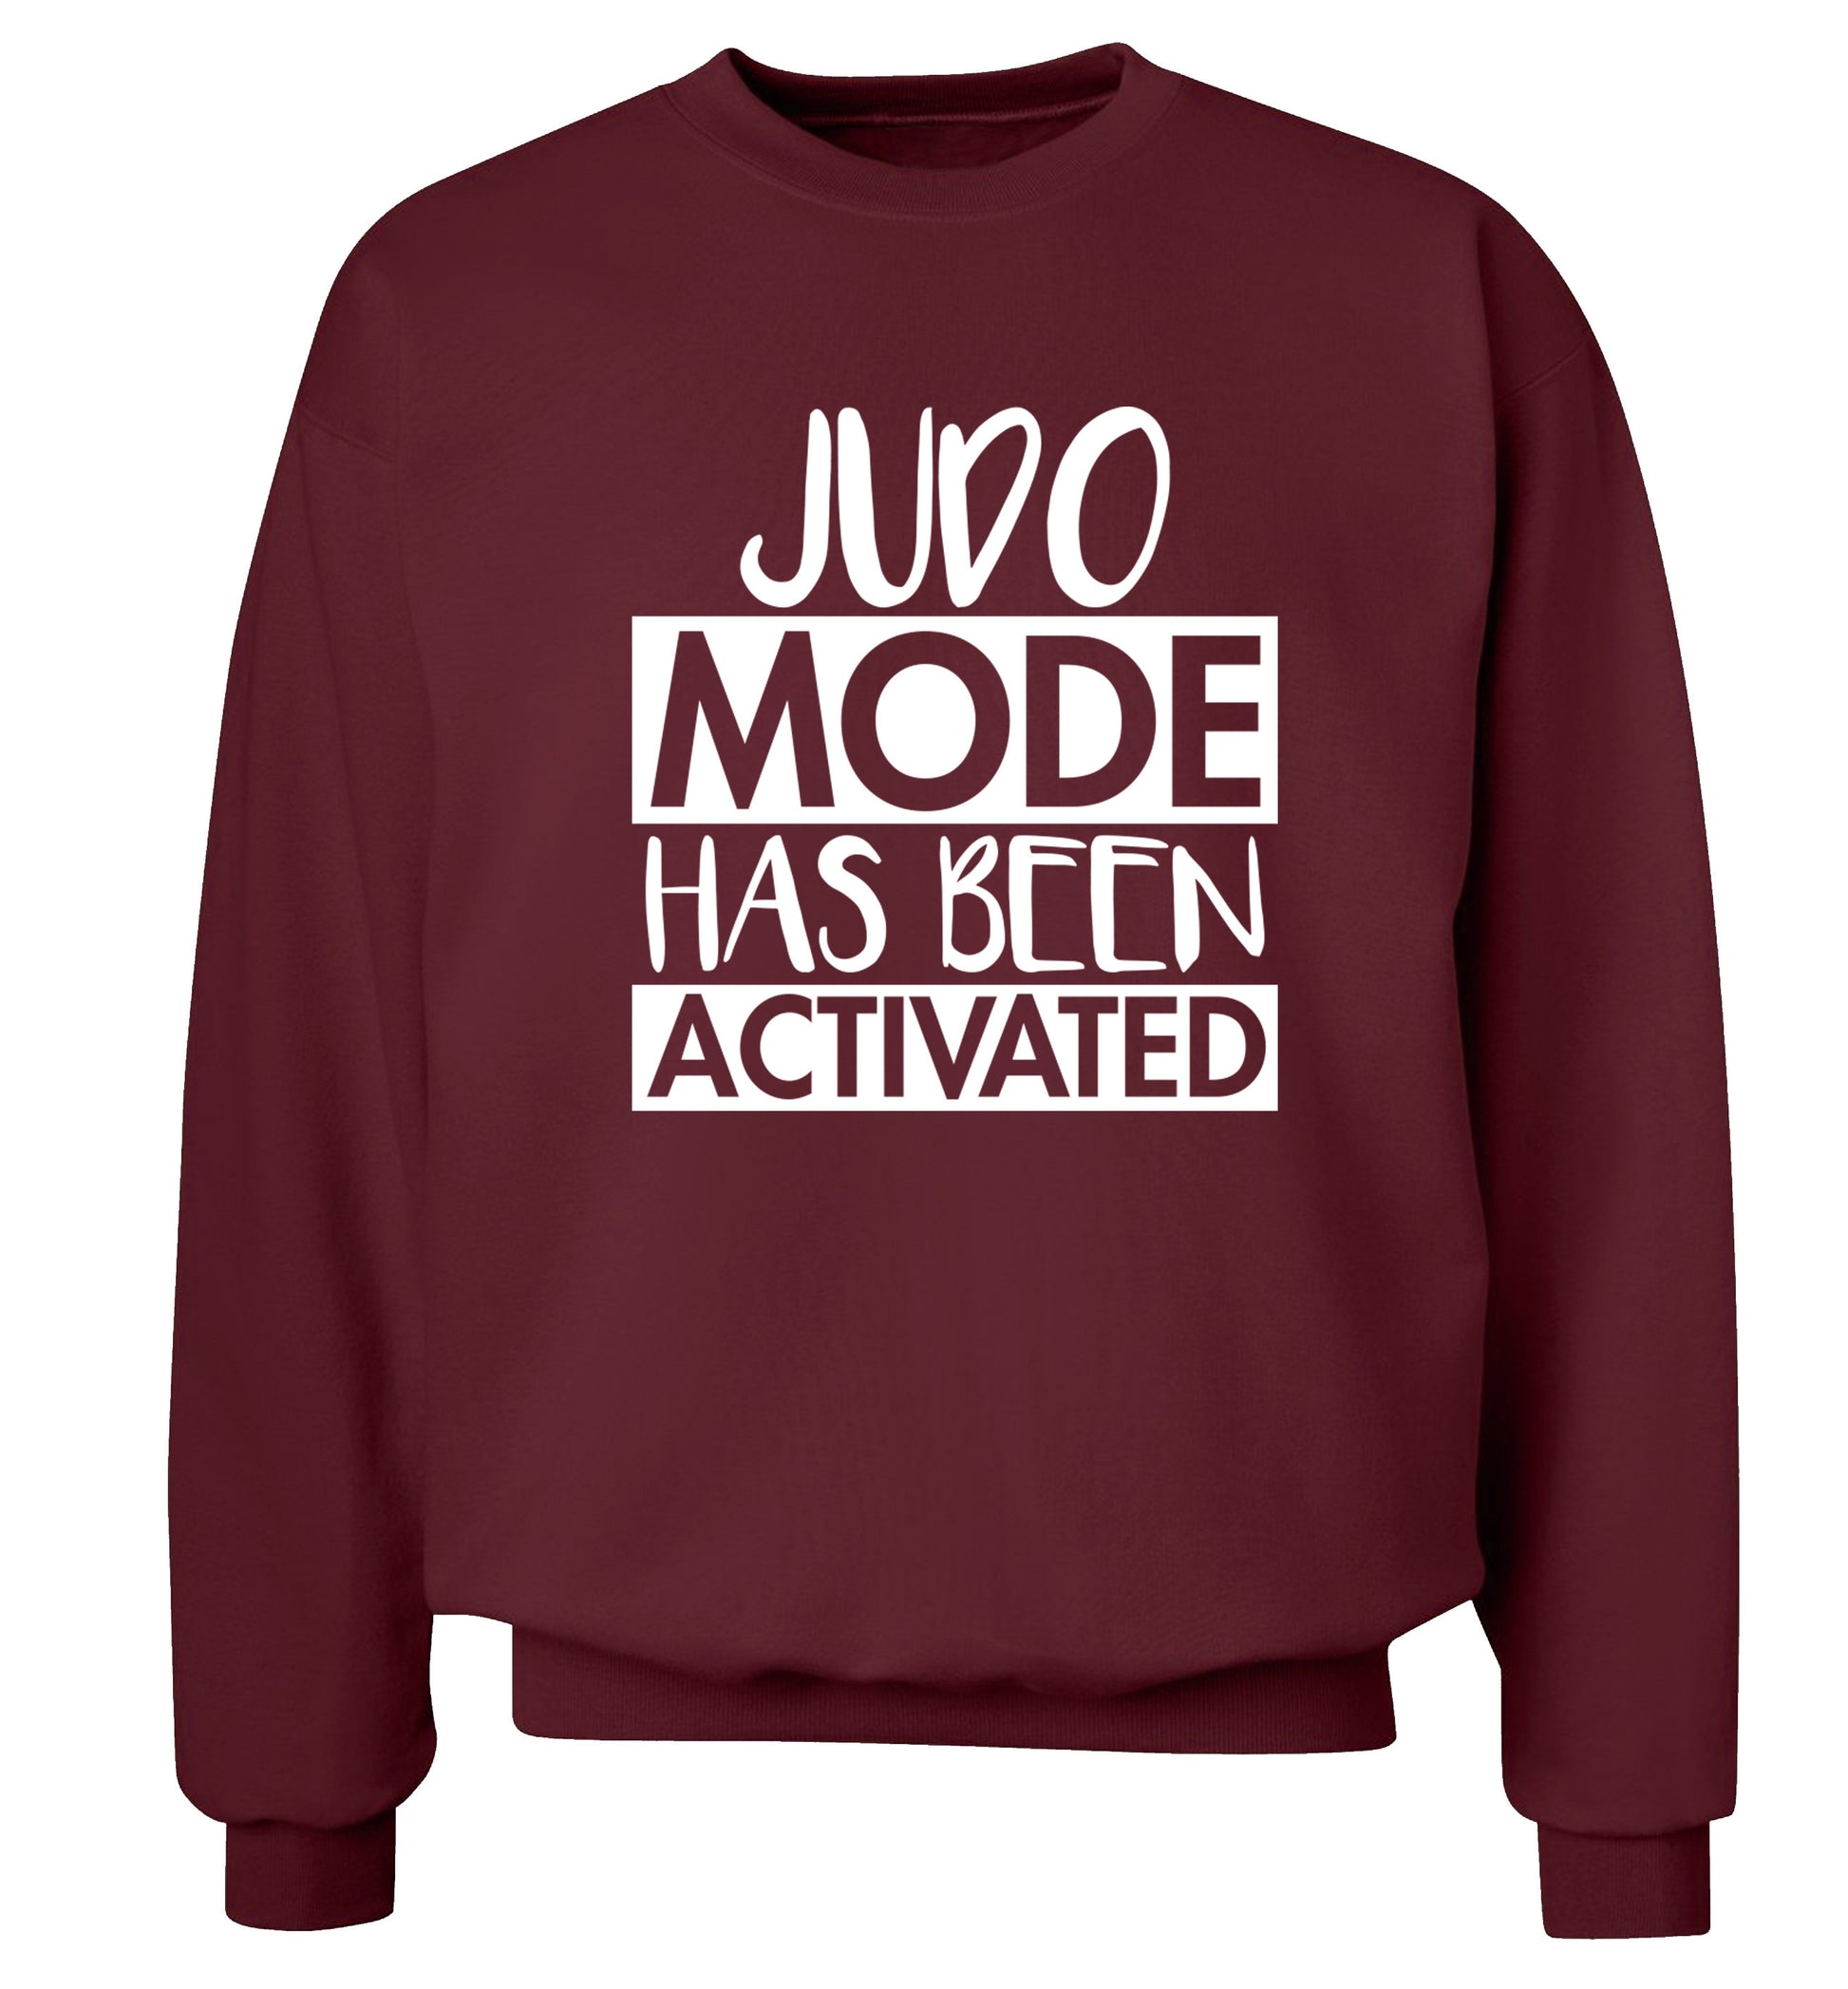 Judo mode activated Adult's unisex maroon Sweater 2XL